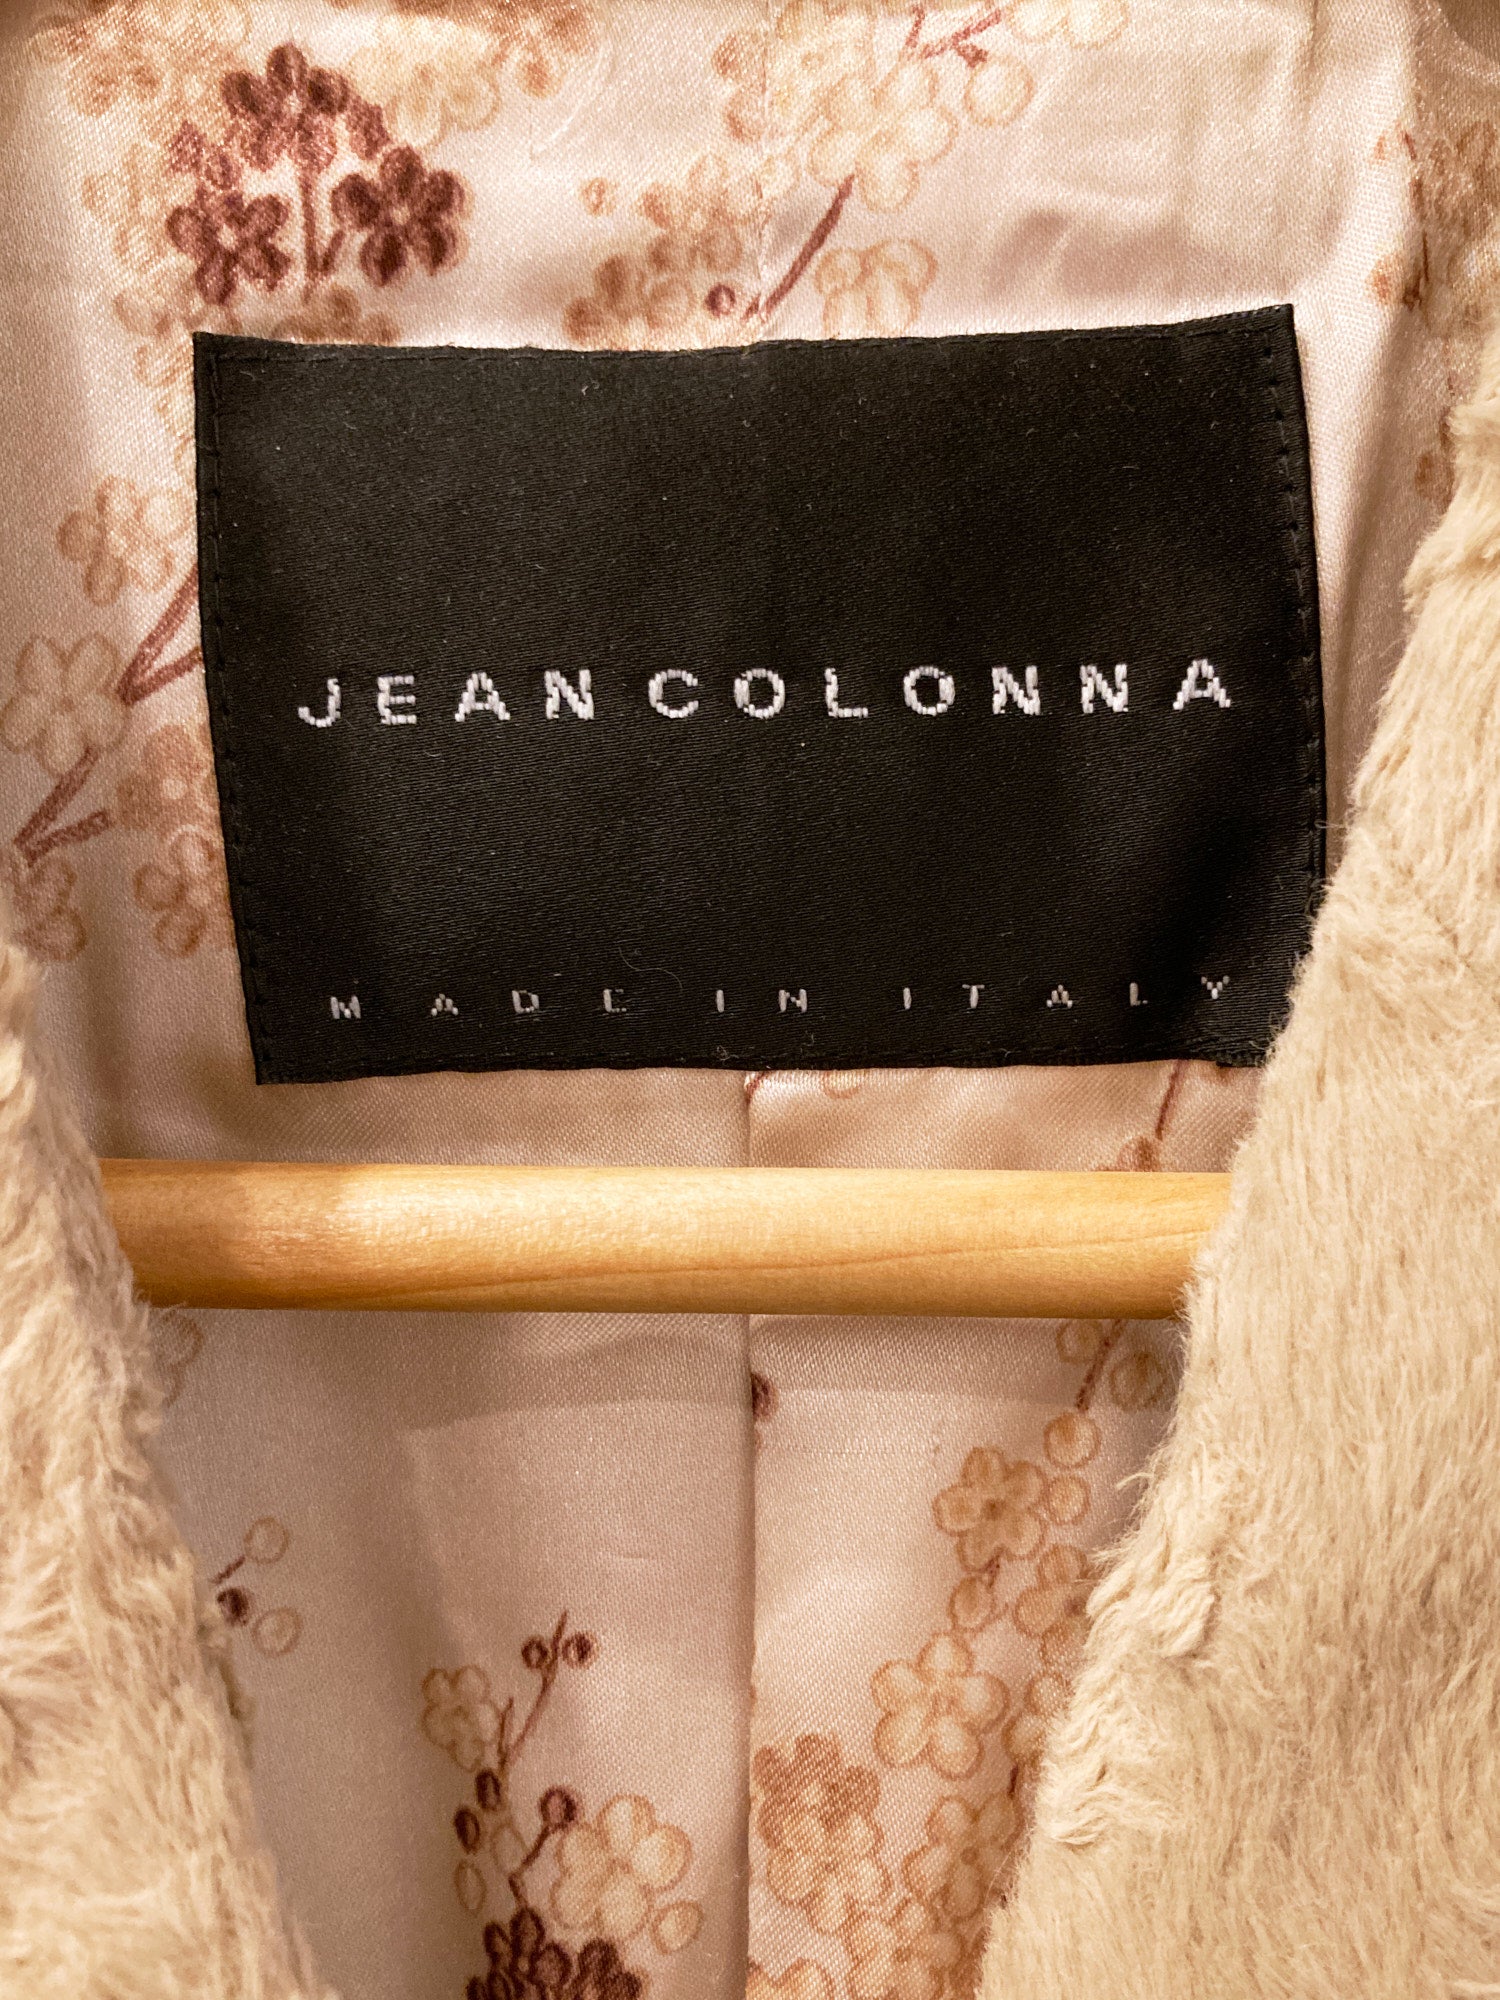 Jean Colonna AW1998 beige faux fur coat with floral print lining - sz 40